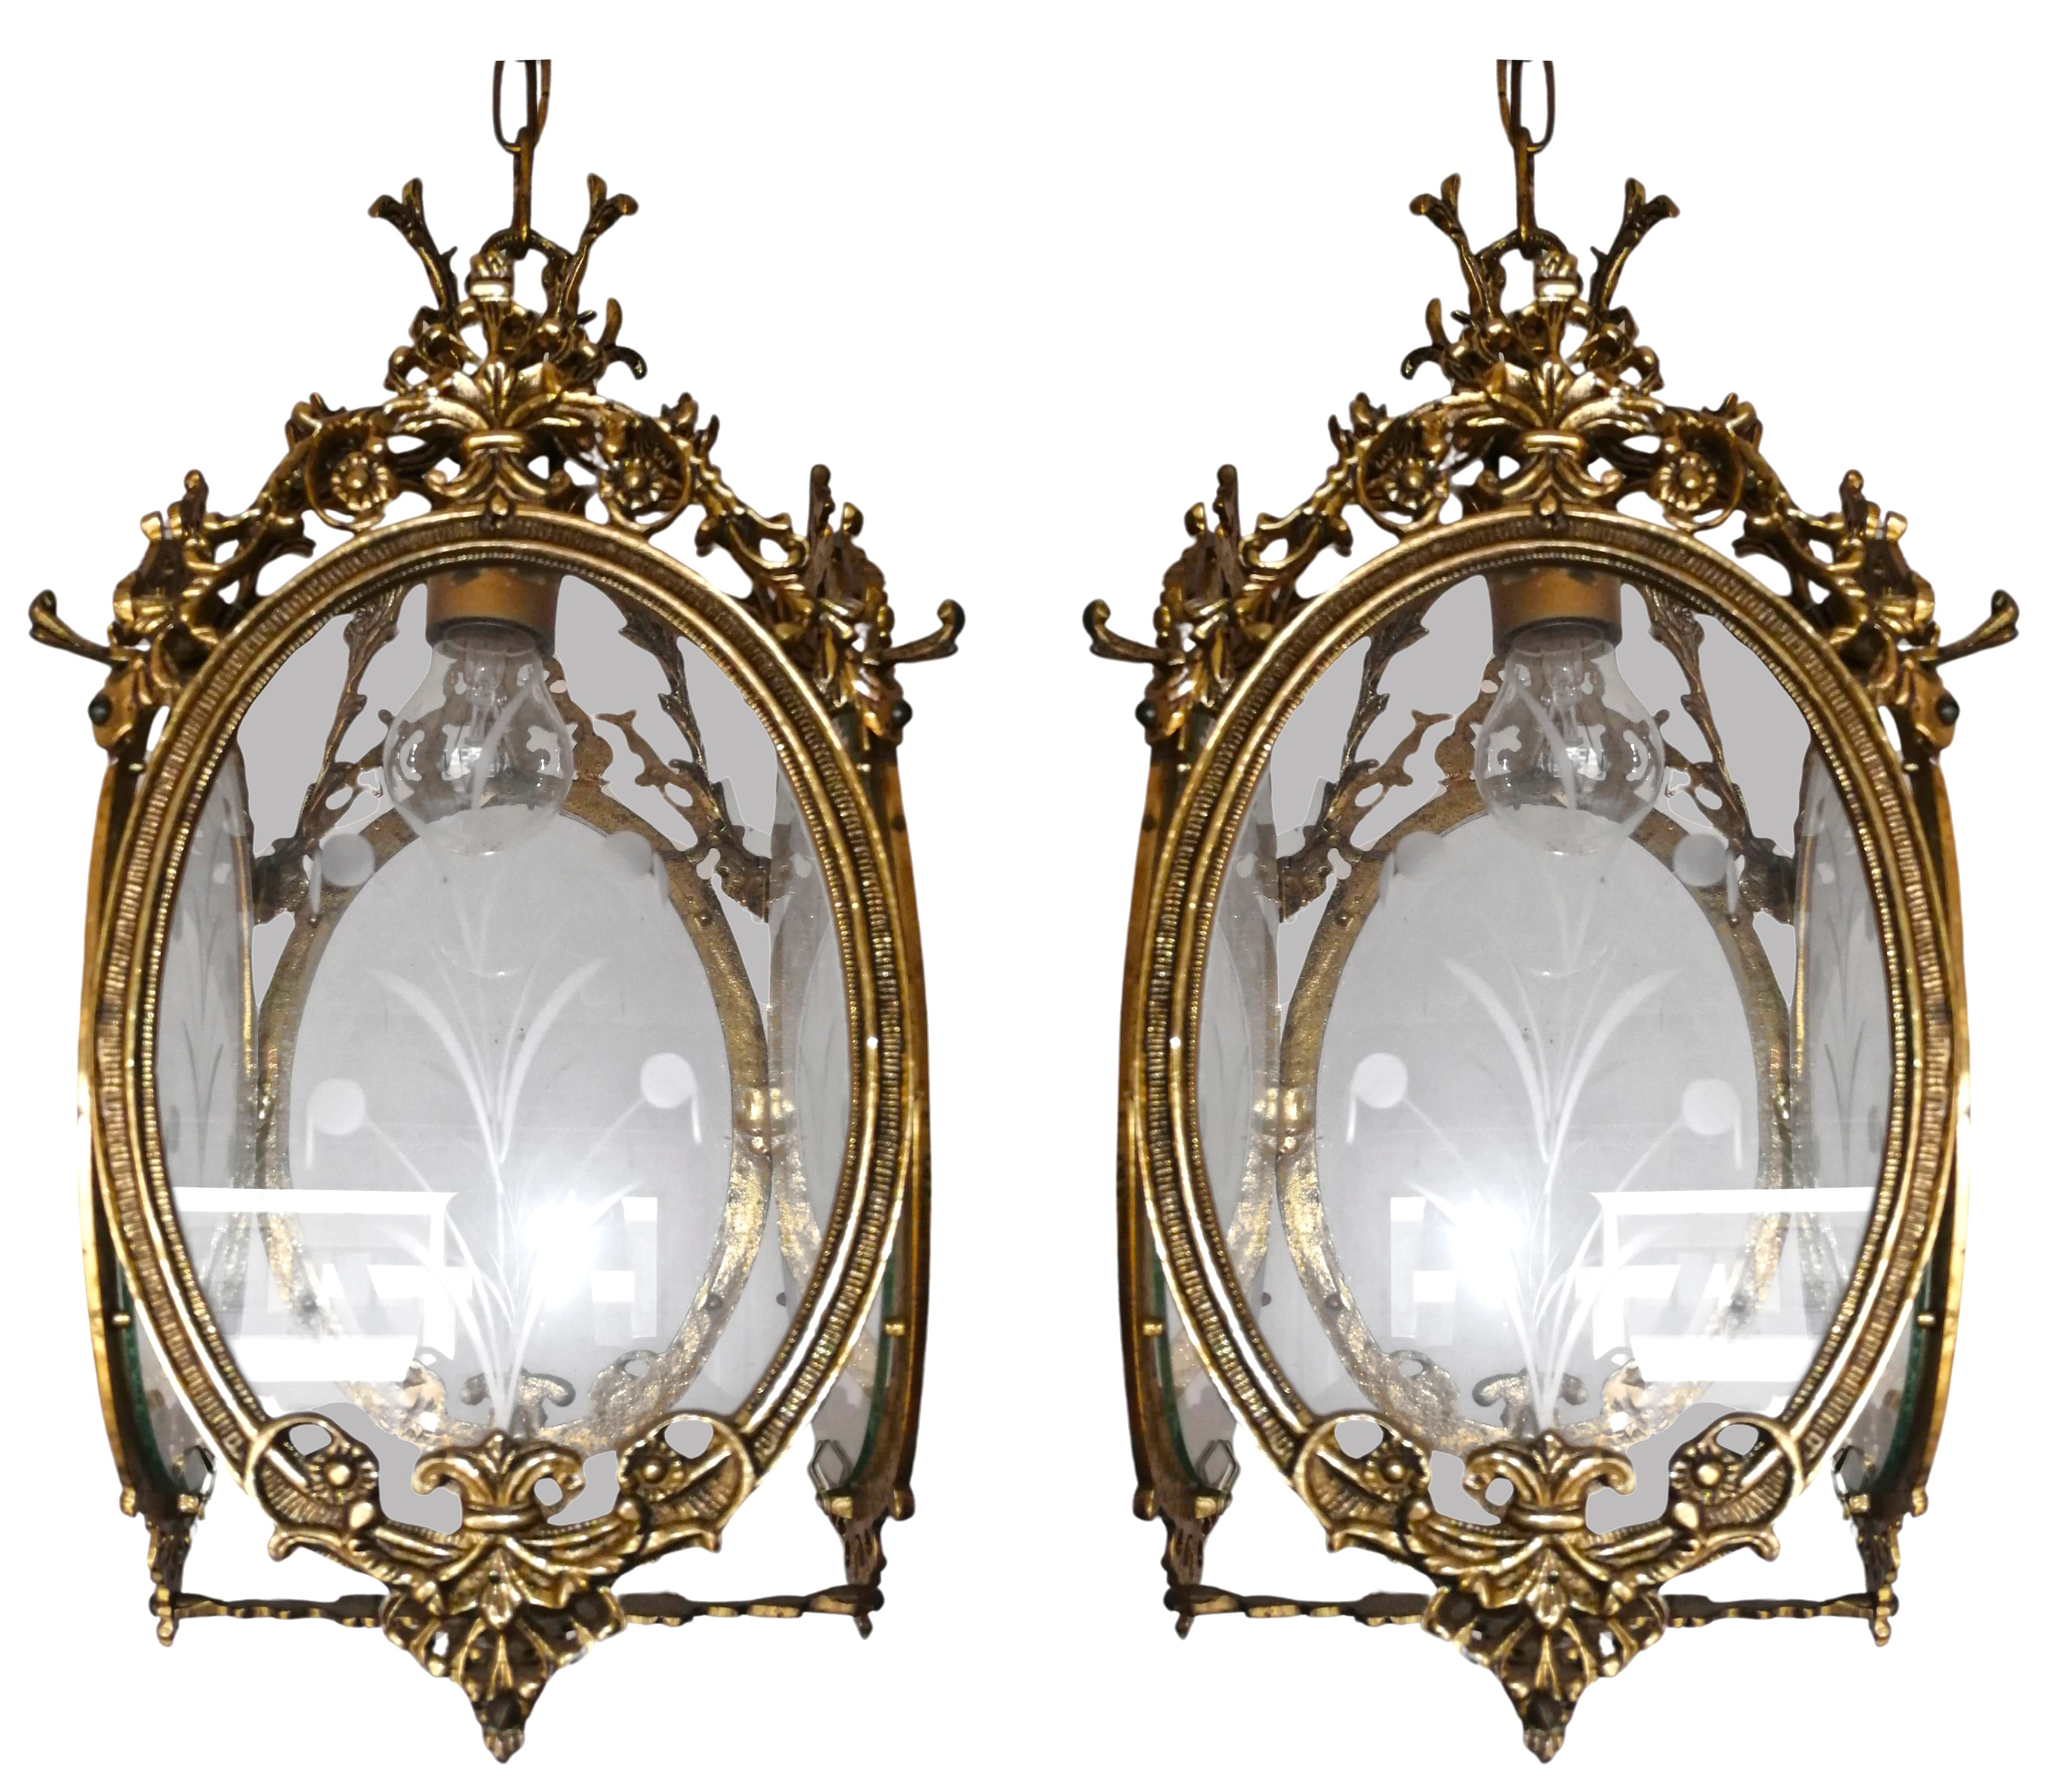 Beautiful antique pair of Louis XVI French lanterns. Four cast gilt bronze frames with cut and etched glass panels shade.
Price per unit.

Dimensions :
